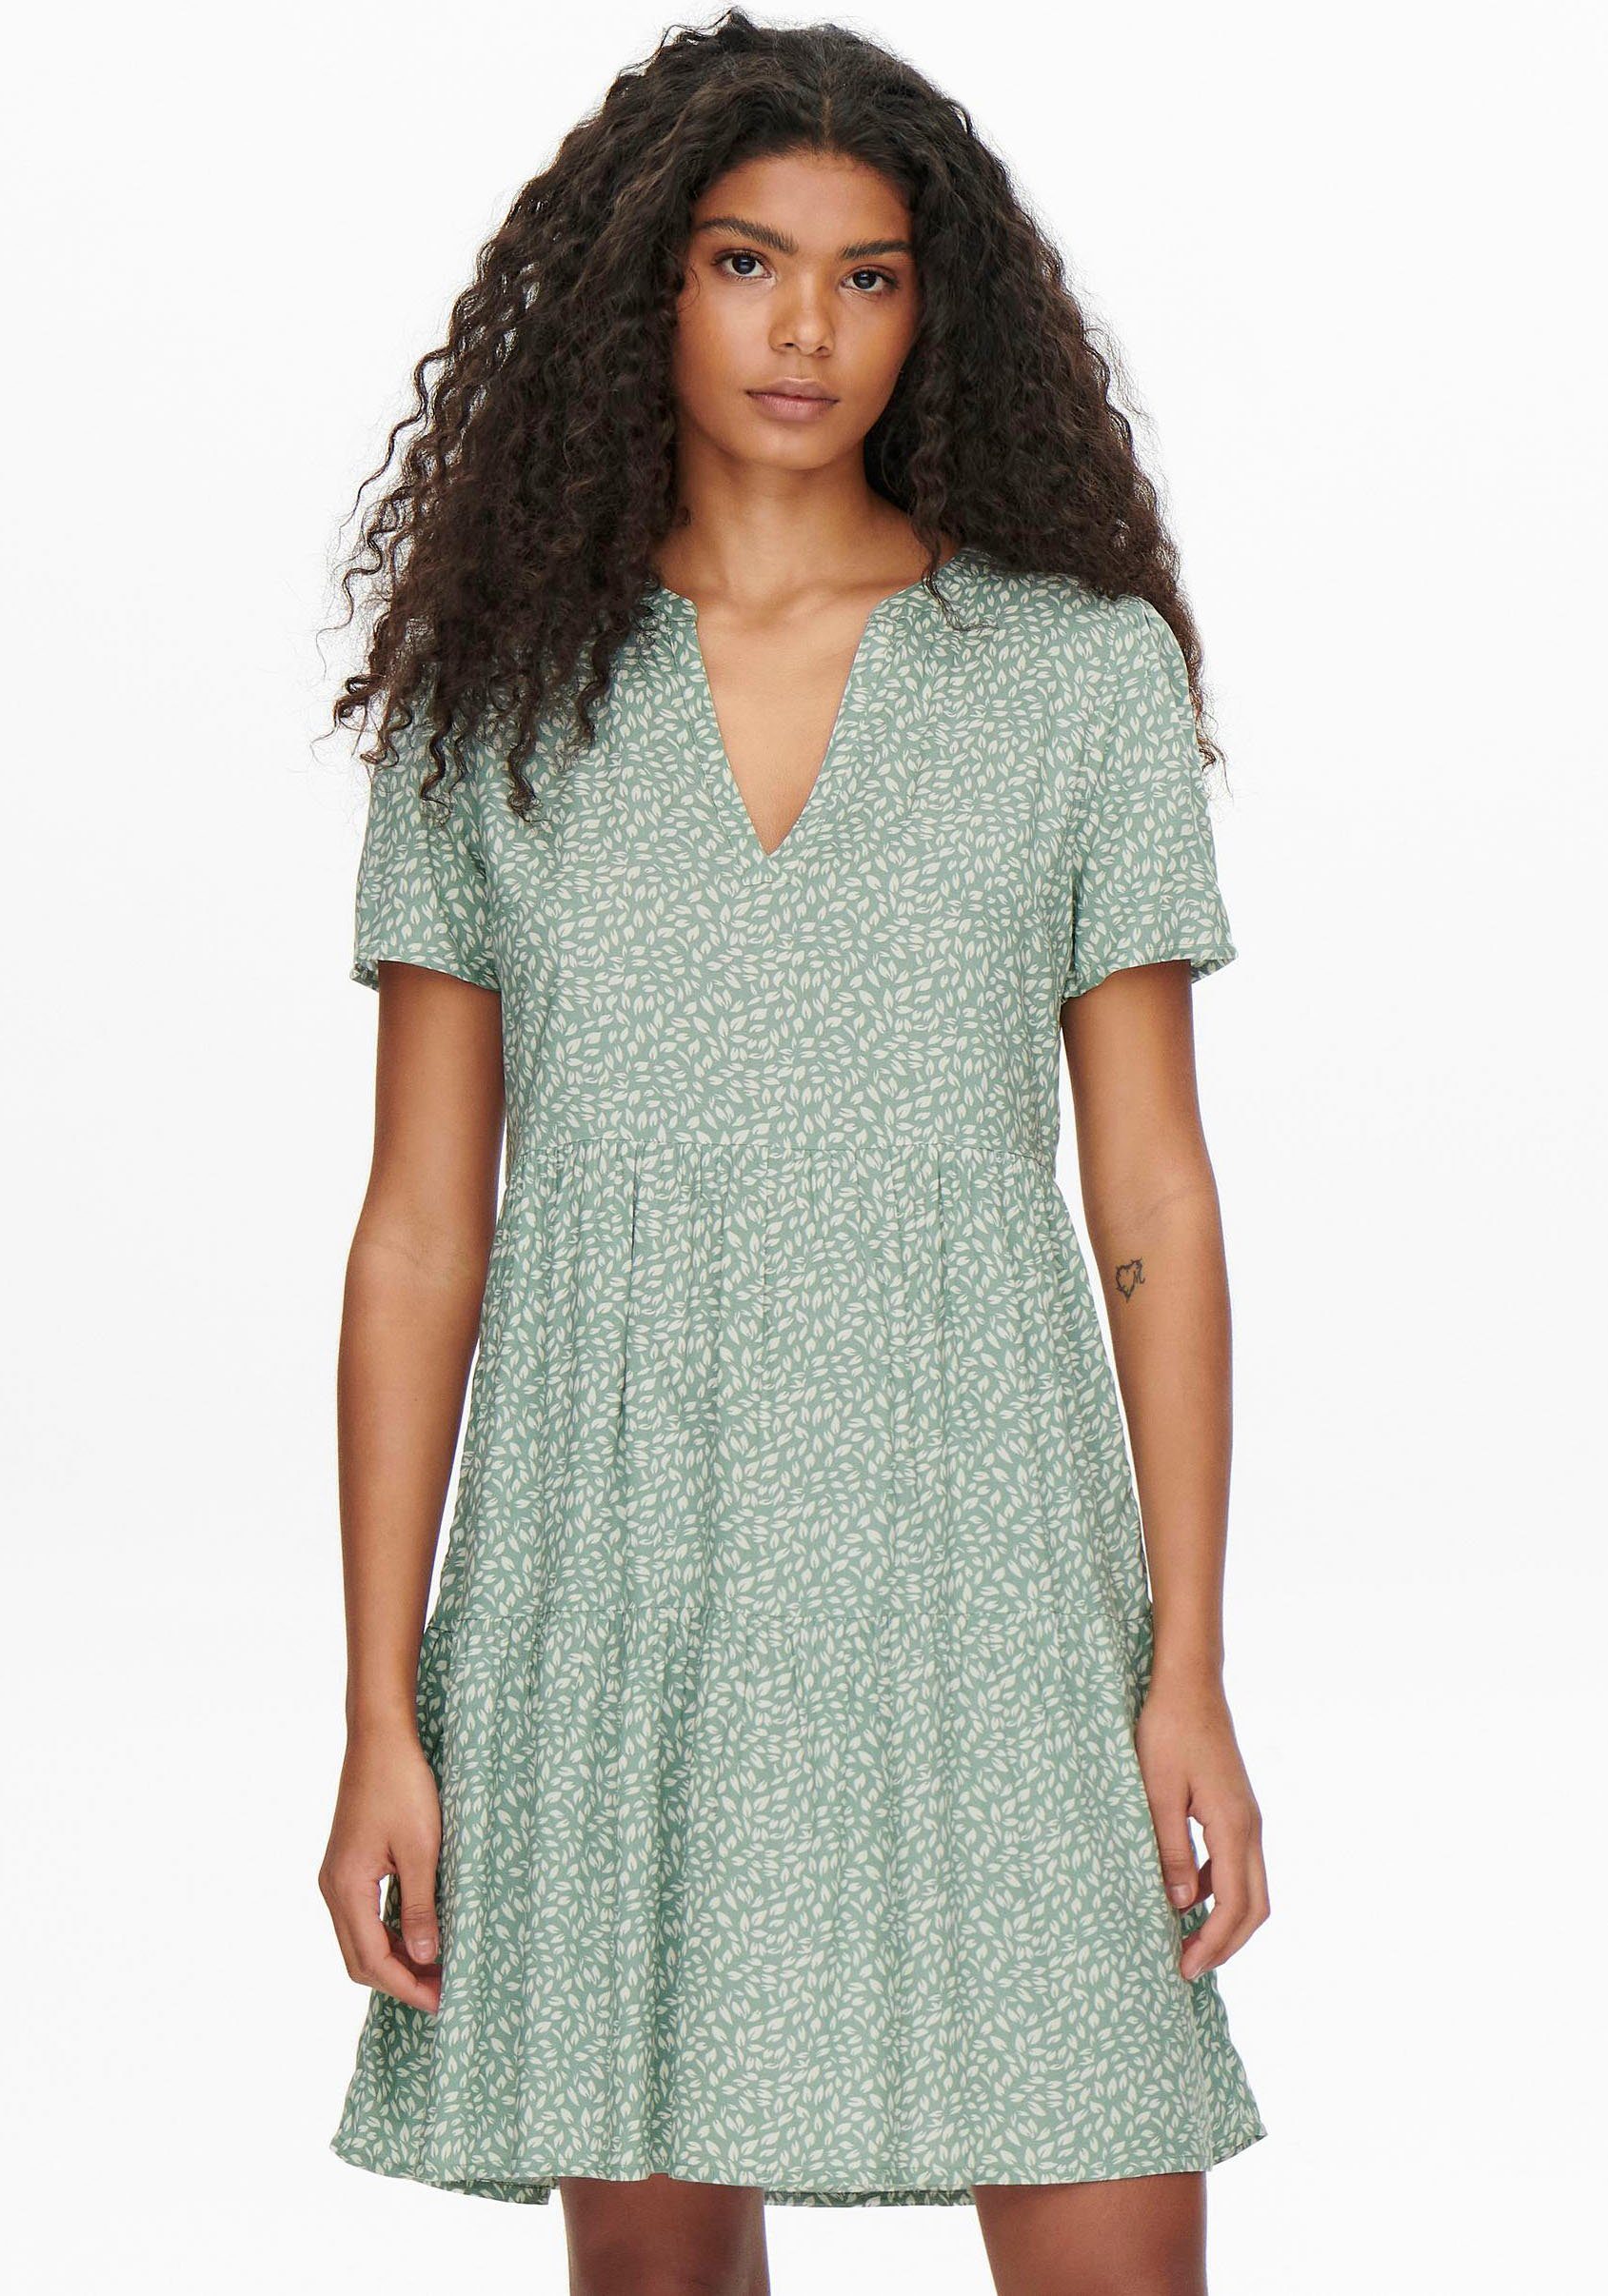 leafs PTM LIFE S/S AOP:White Green THEA ONLY Chinois NOOS ONLZALLY Sommerkleid DRESS